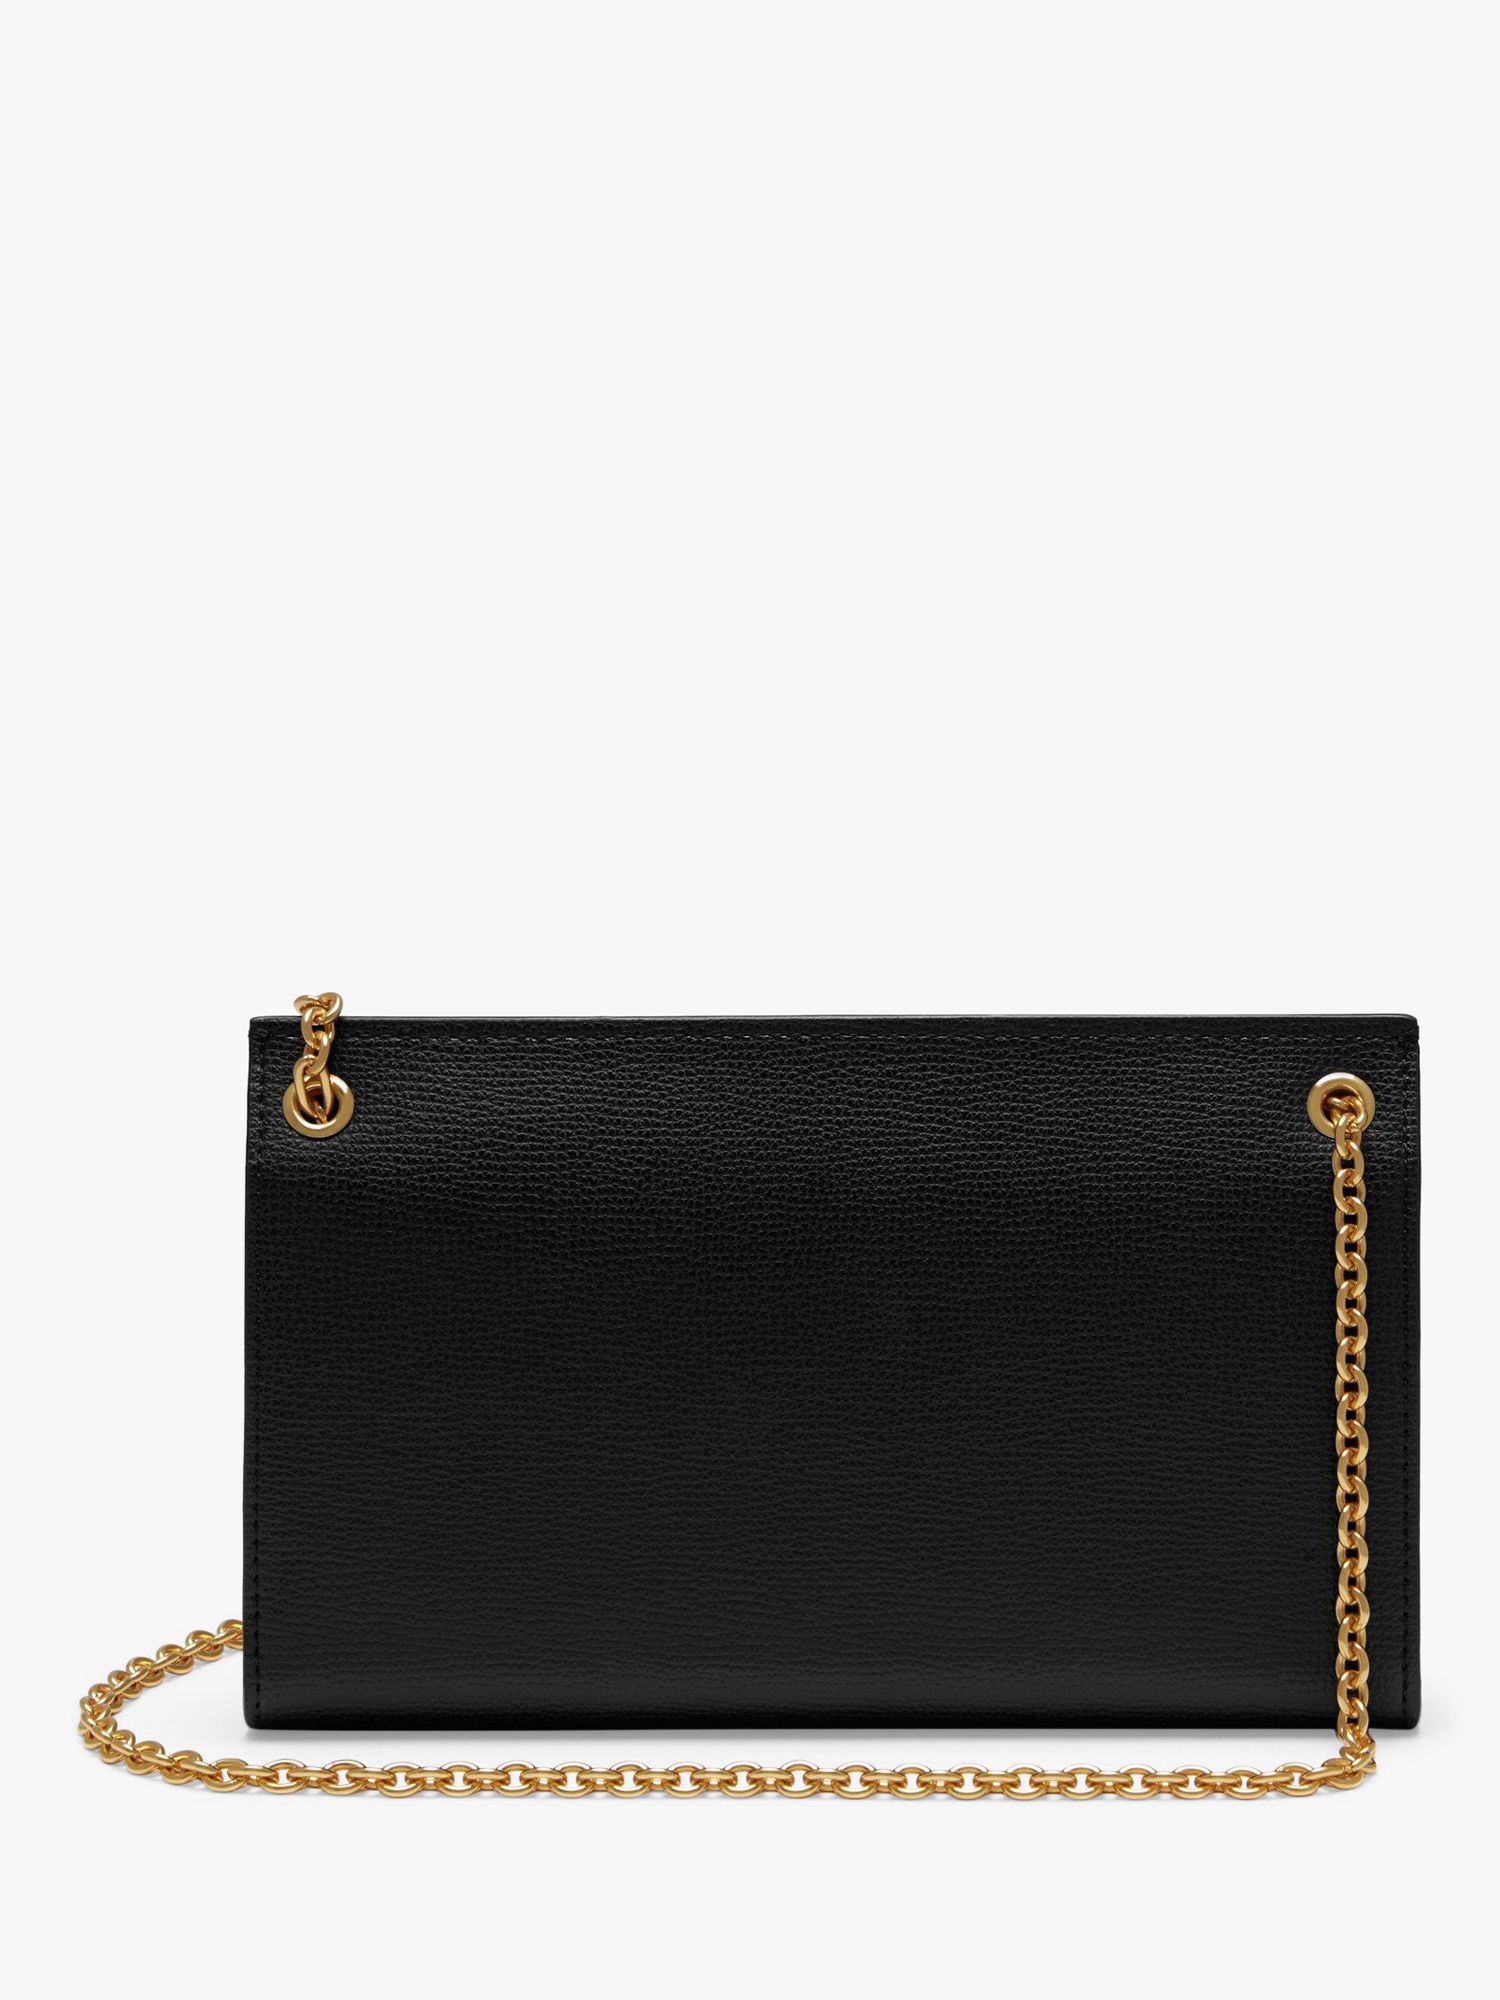 Mulberry Amberley Small Classic Grain Leather Clutch Bag, Black at John ...